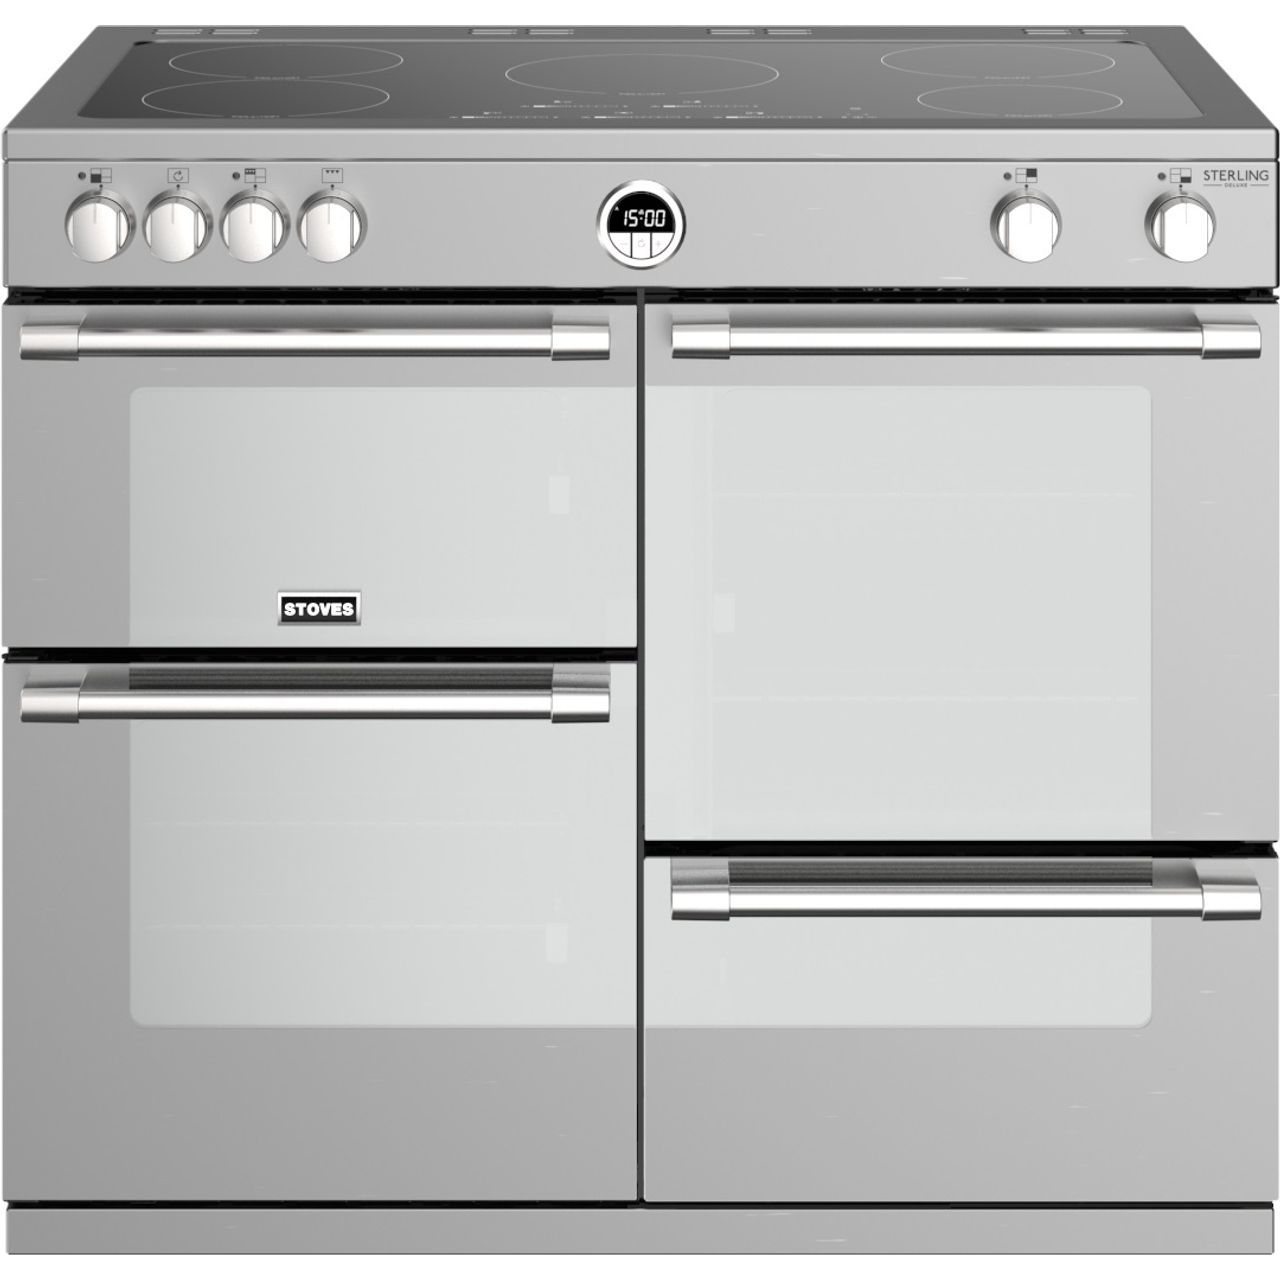 Stoves Sterling Deluxe S1000EI 100cm Electric Range Cooker with Induction Hob Review